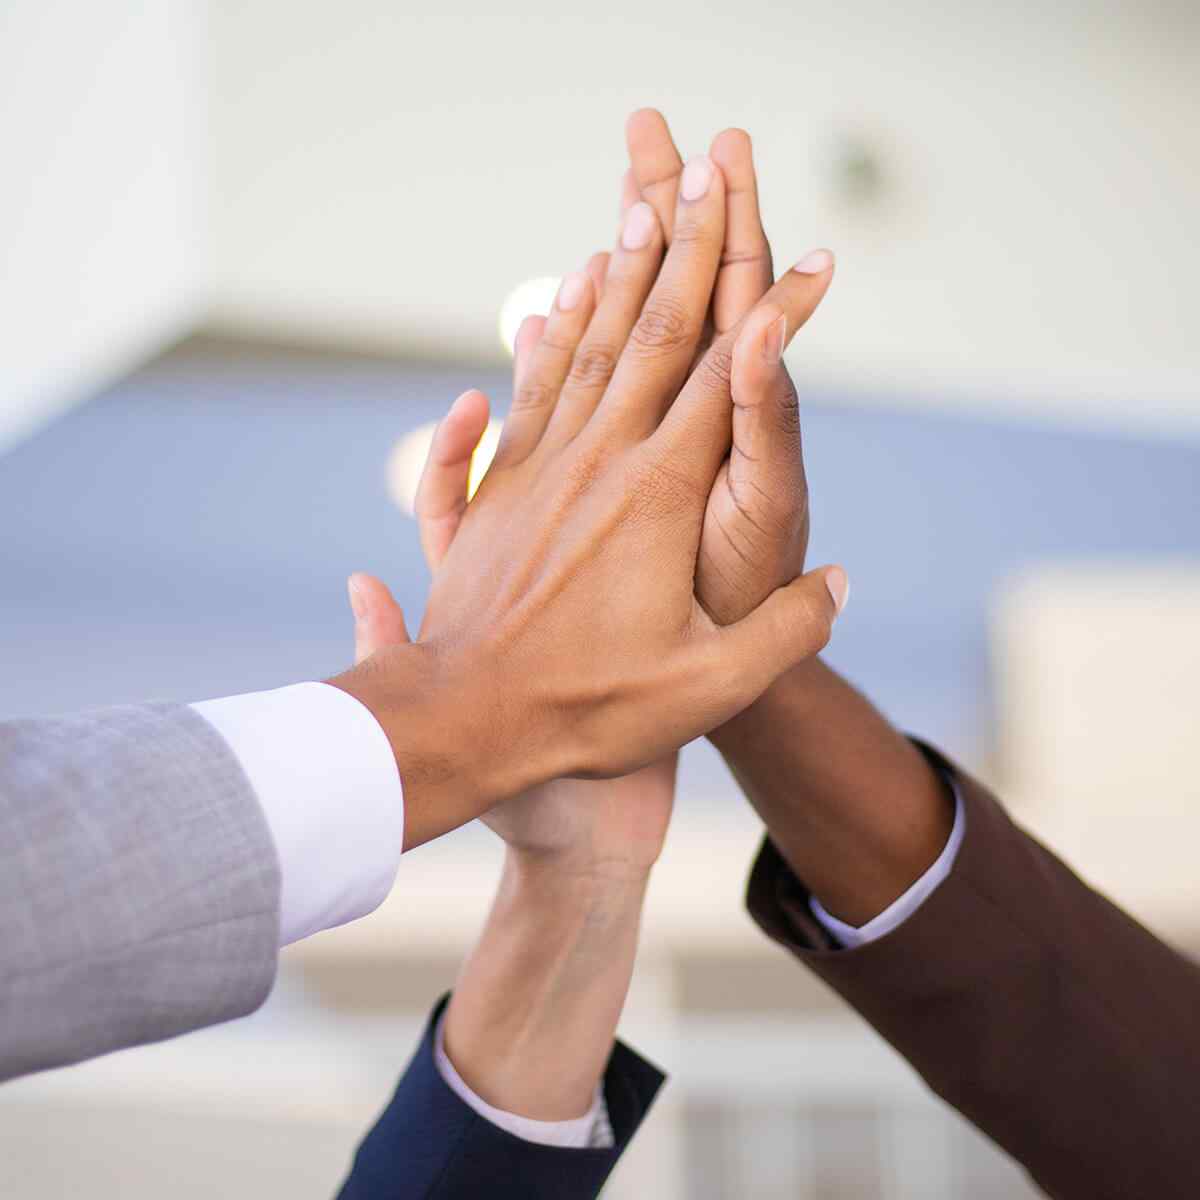 Business colleagues celebrating success and joining hands. Multiethnic group of man and women giving high five to each other. Achievement concept